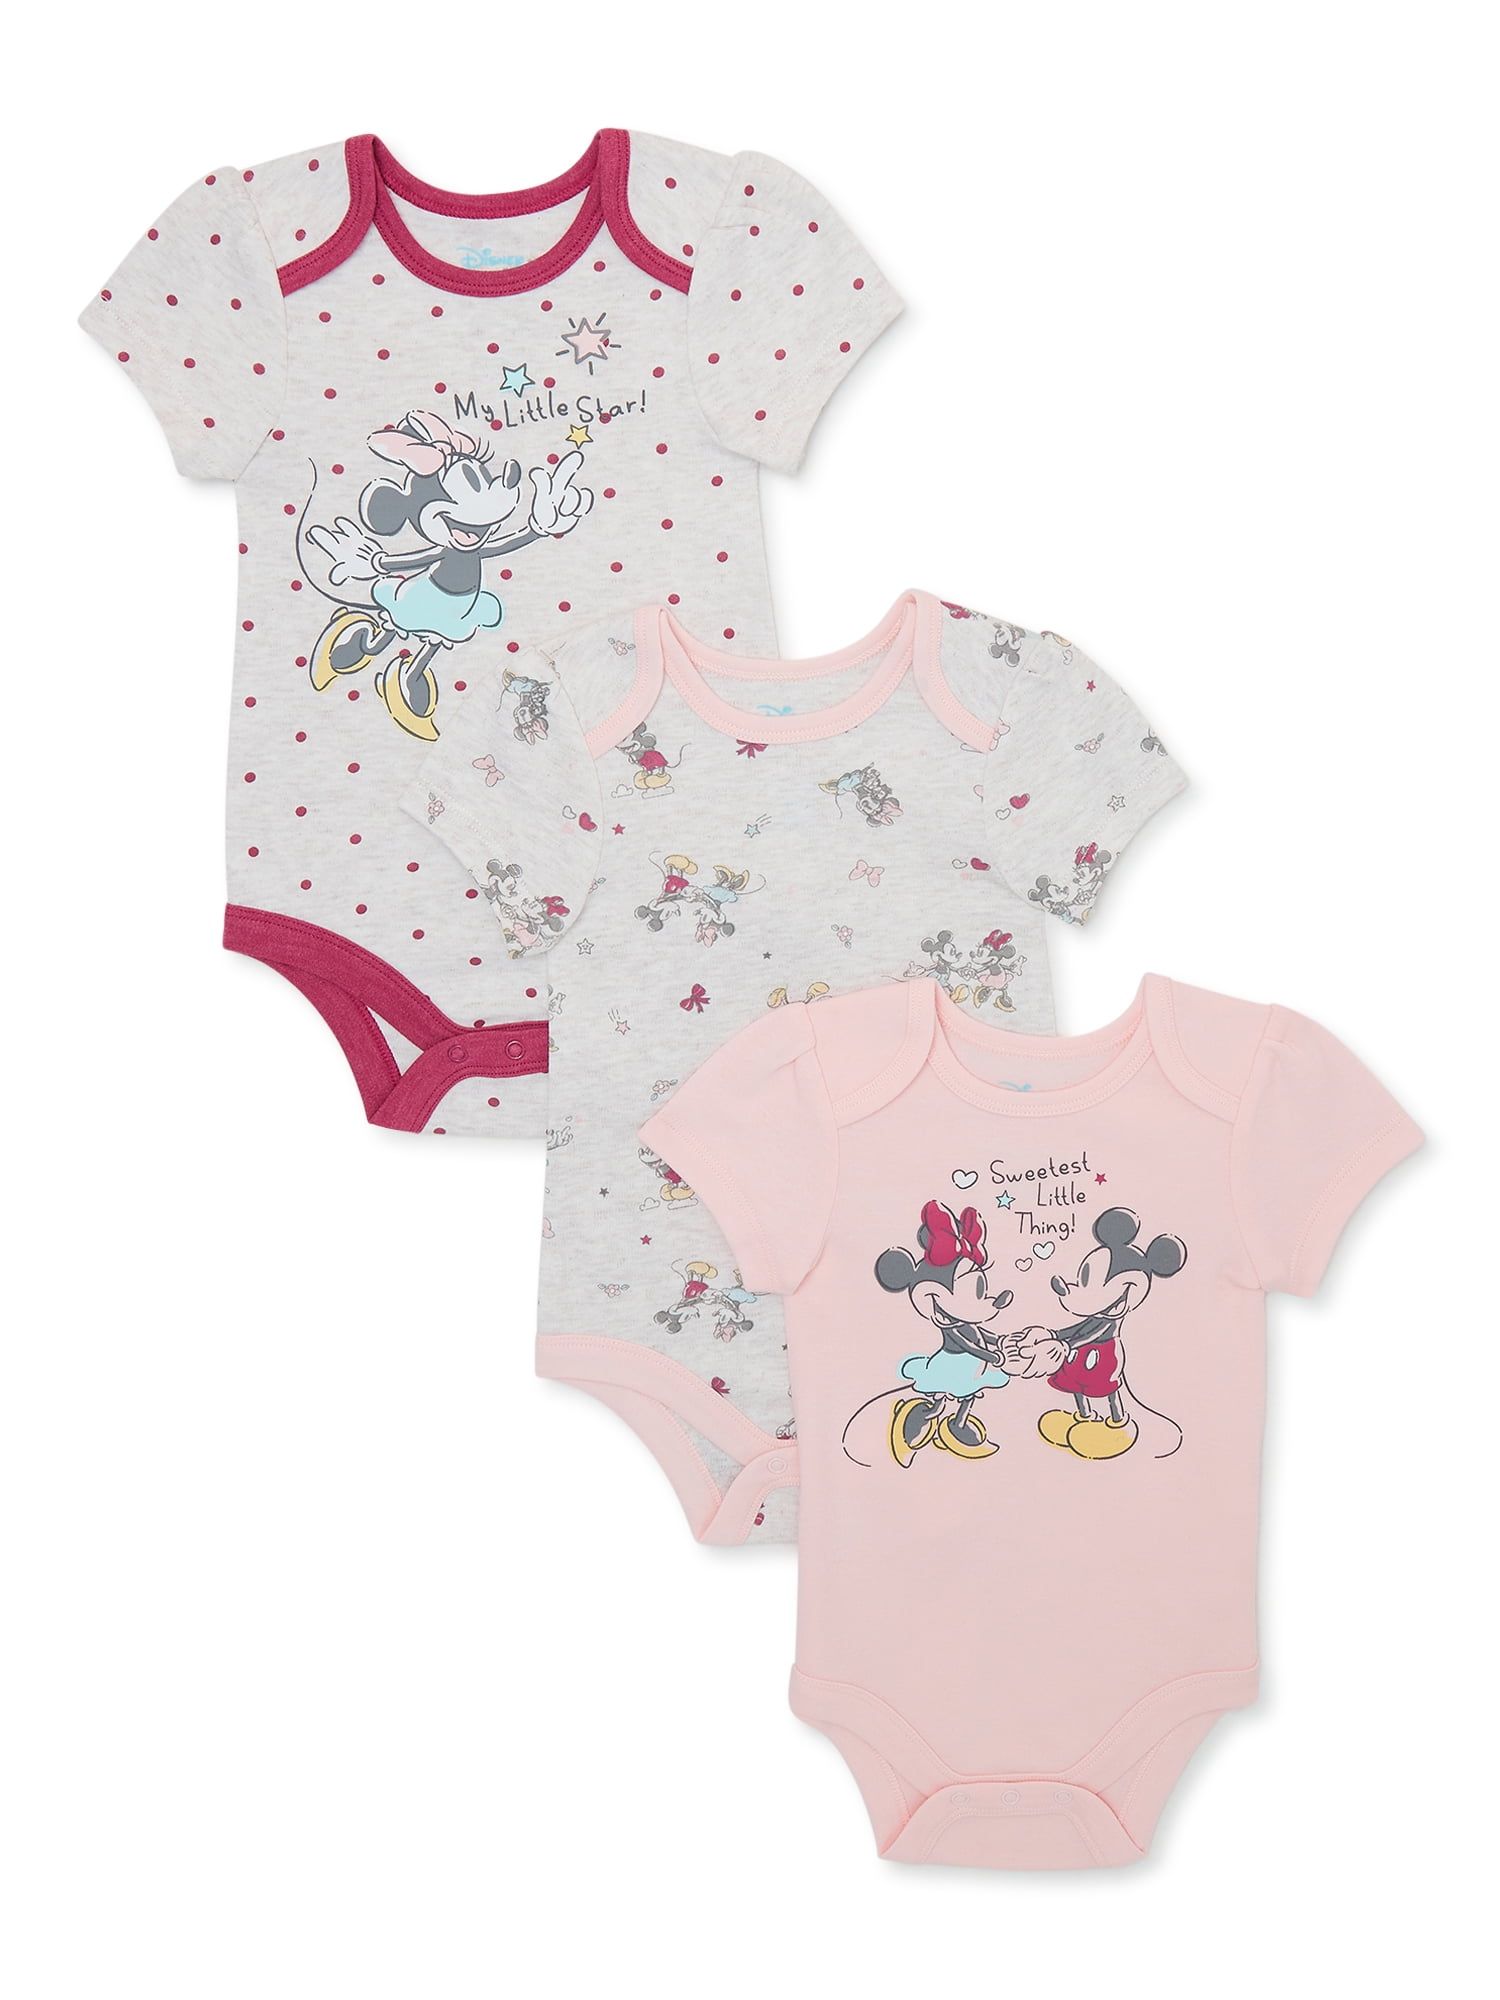 Disney Baby Wishes + Dreams Minnie Mouse Baby Boys and Girls Unisex Bodysuit, 3-Pack, Sizes 0-12 Months